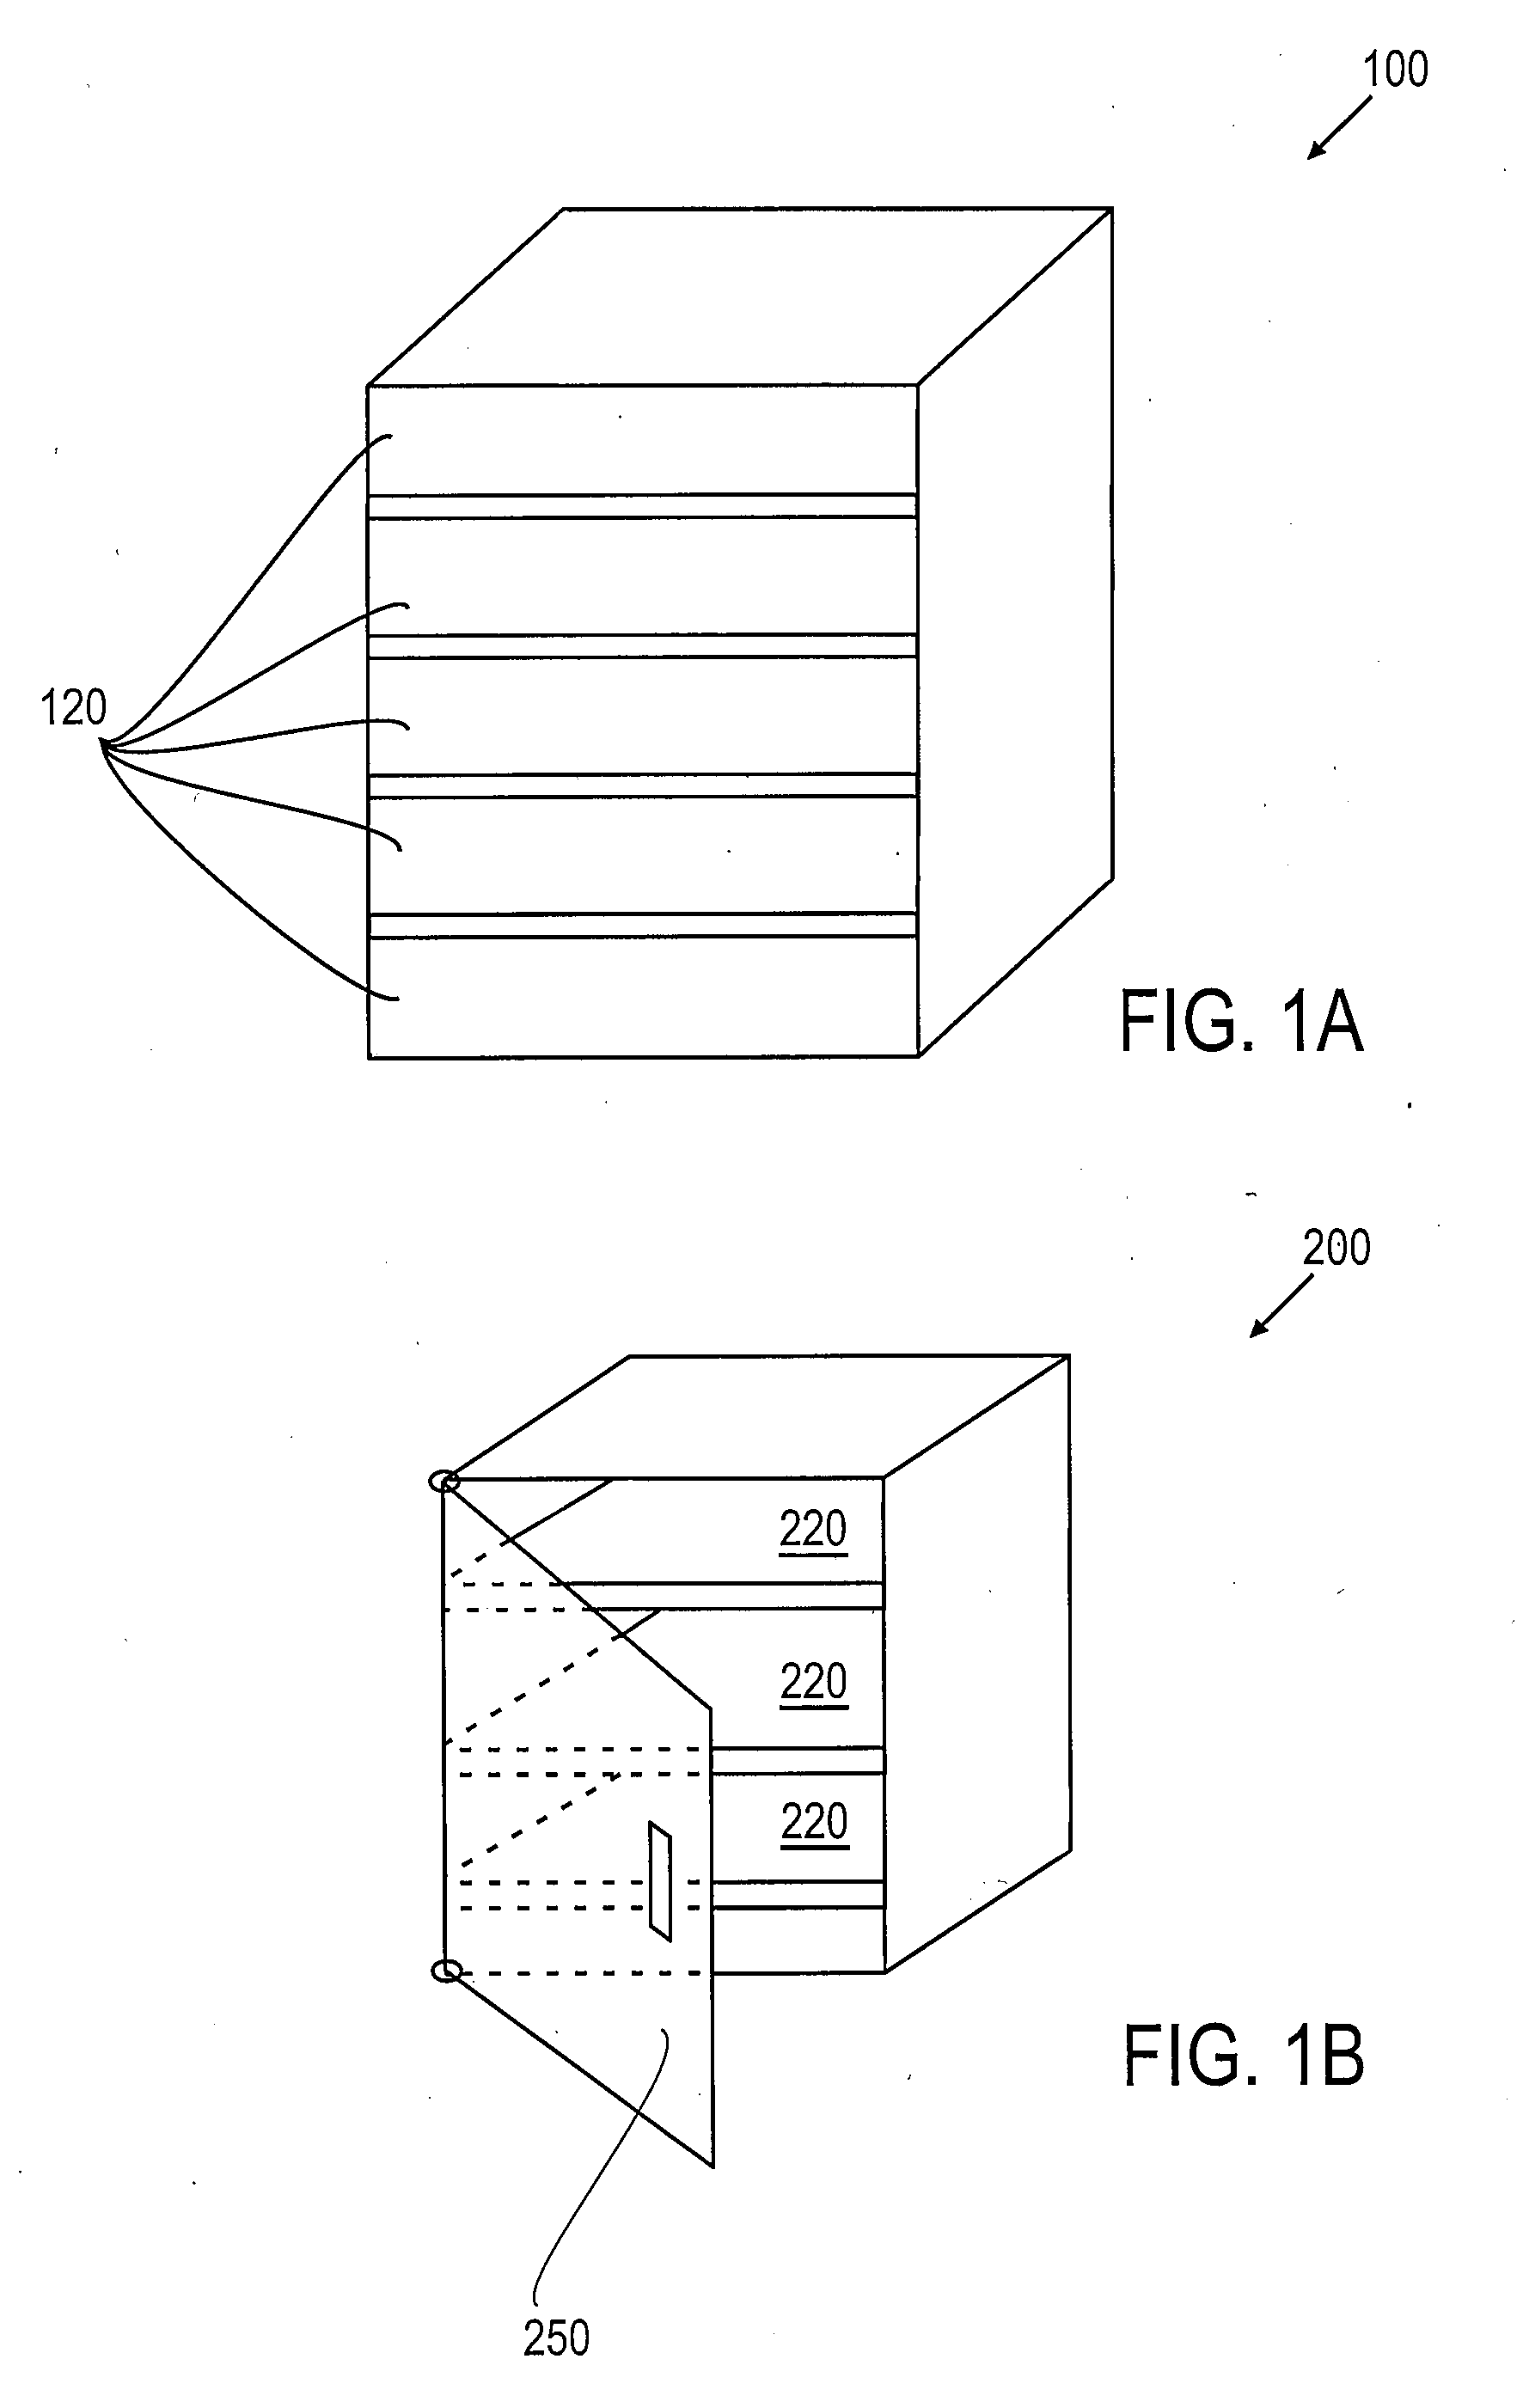 Image-based inventory control system with automatic calibration and image correction